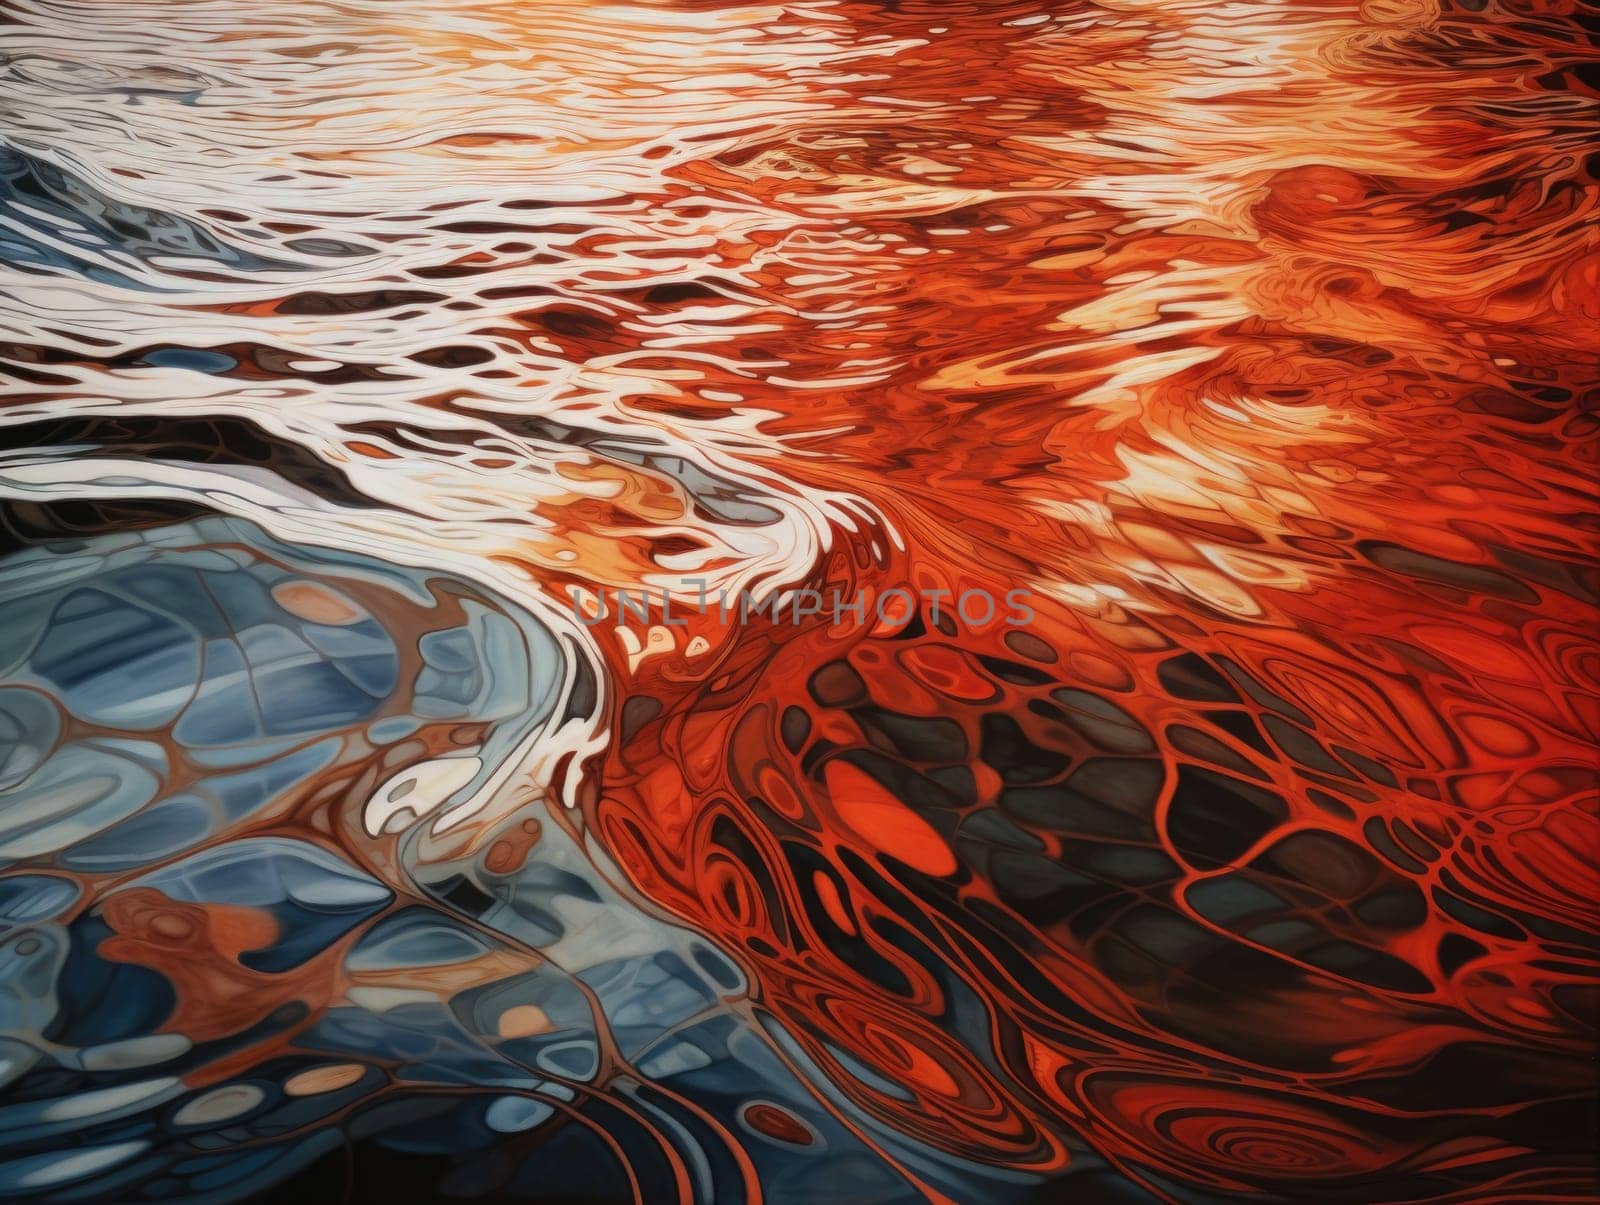 A dynamic and bold painting depicting a wave in vibrant hues of red and blue.